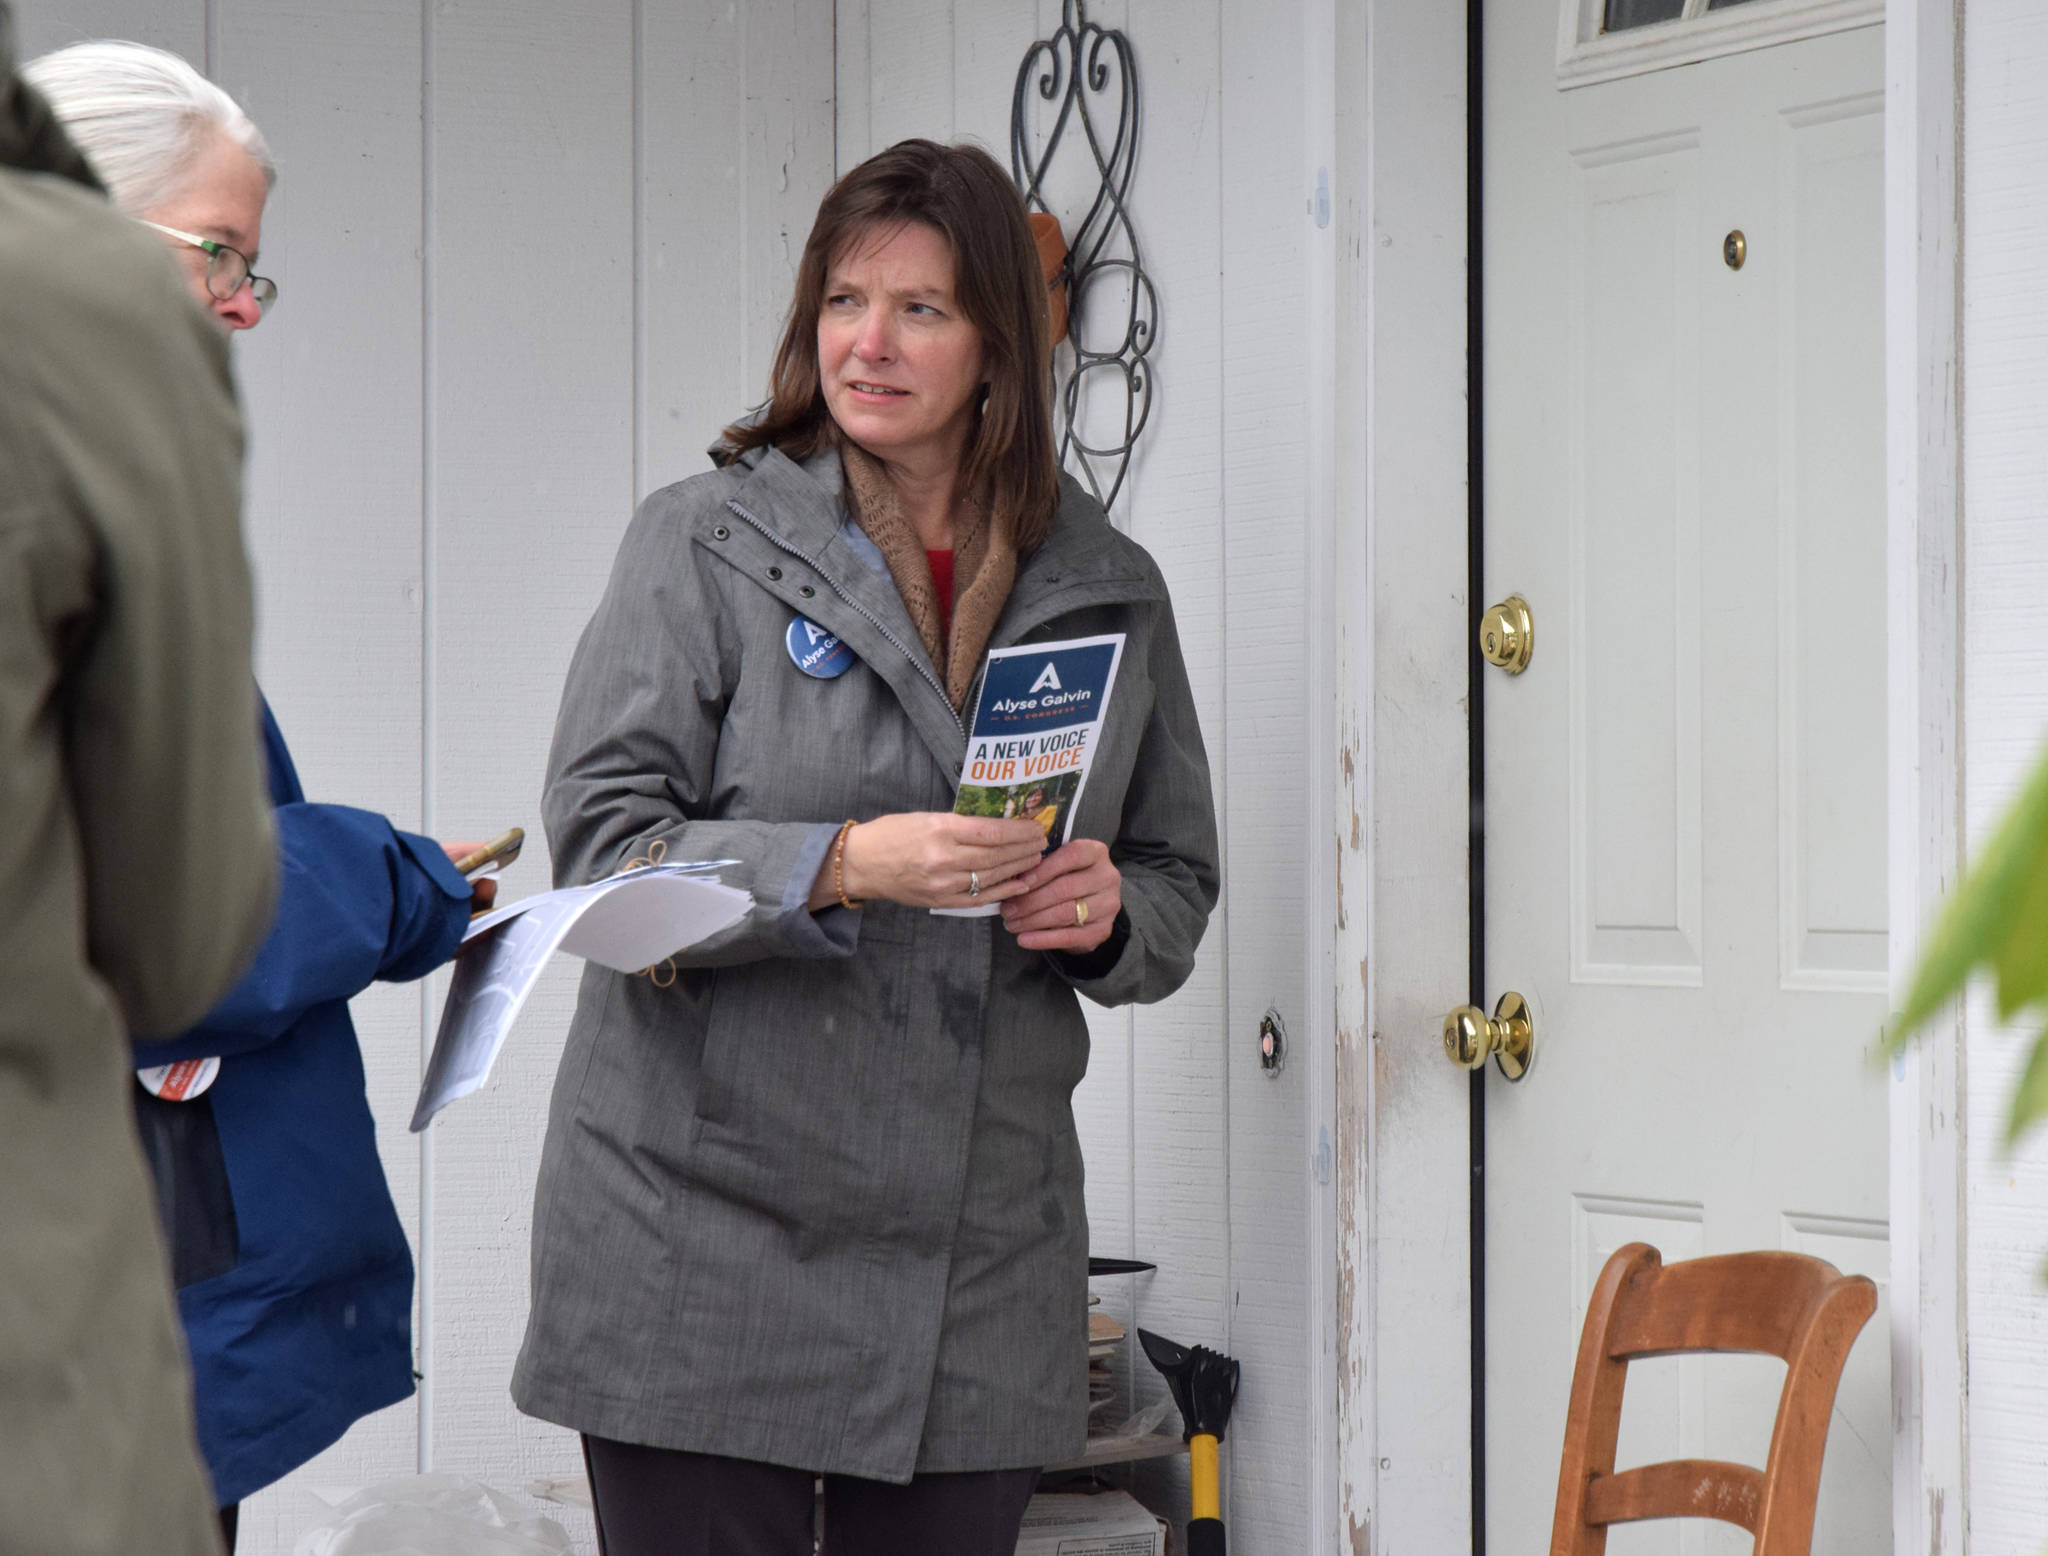 Alyse Galvin, Alaska’s independent candidate for U.S. House of Representatives, prepares to leave a signed brochure while going door to door Sunday, Nov. 4, 2018 in the Mendenhall Valley. (James Brooks | Juneau Empire)